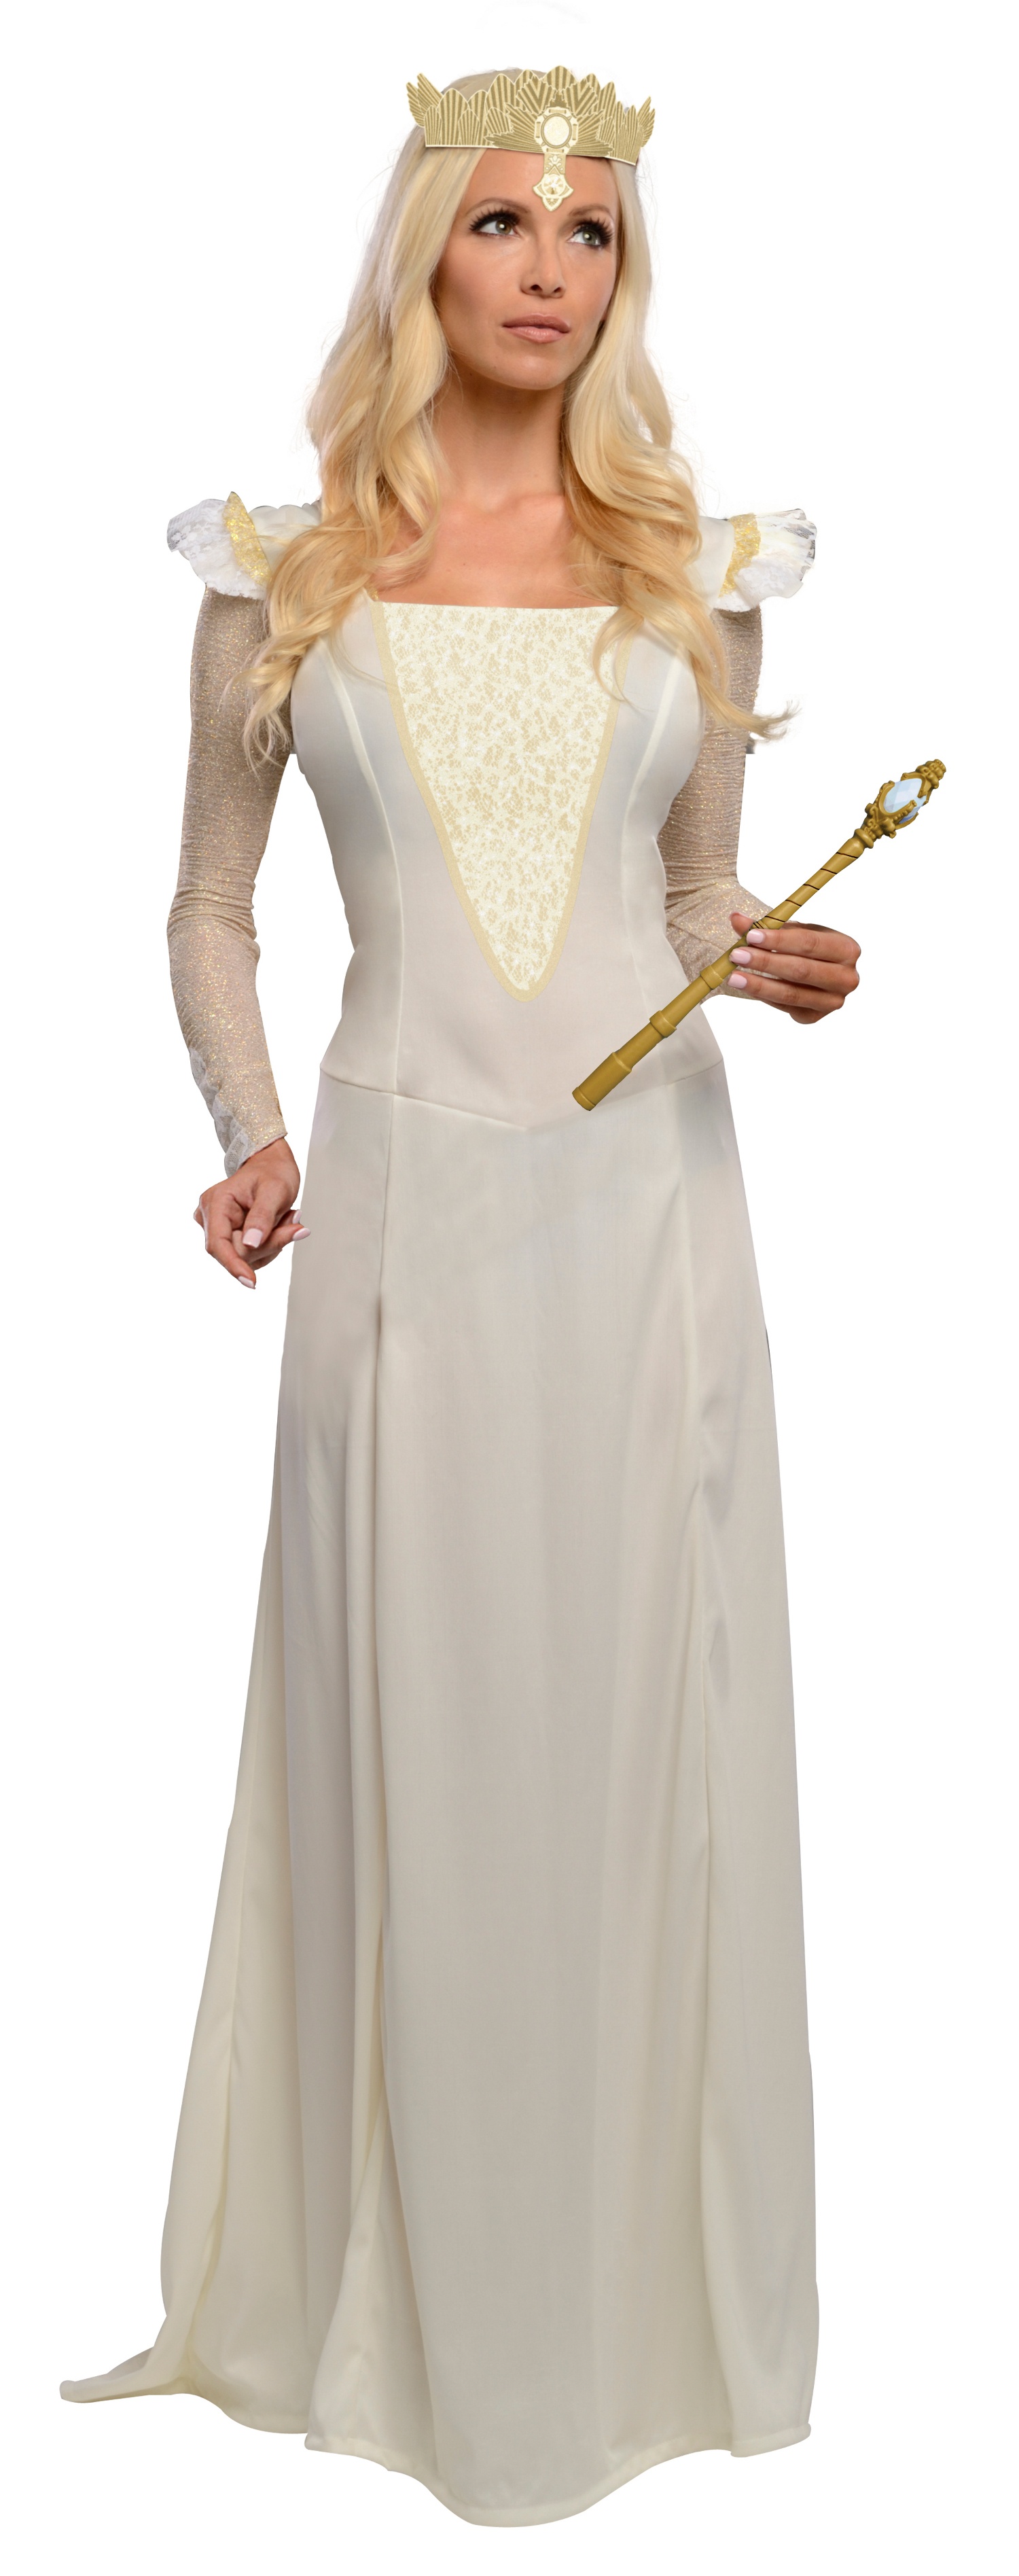 Glinda The Good Witch Adult Costume Mr Costumes